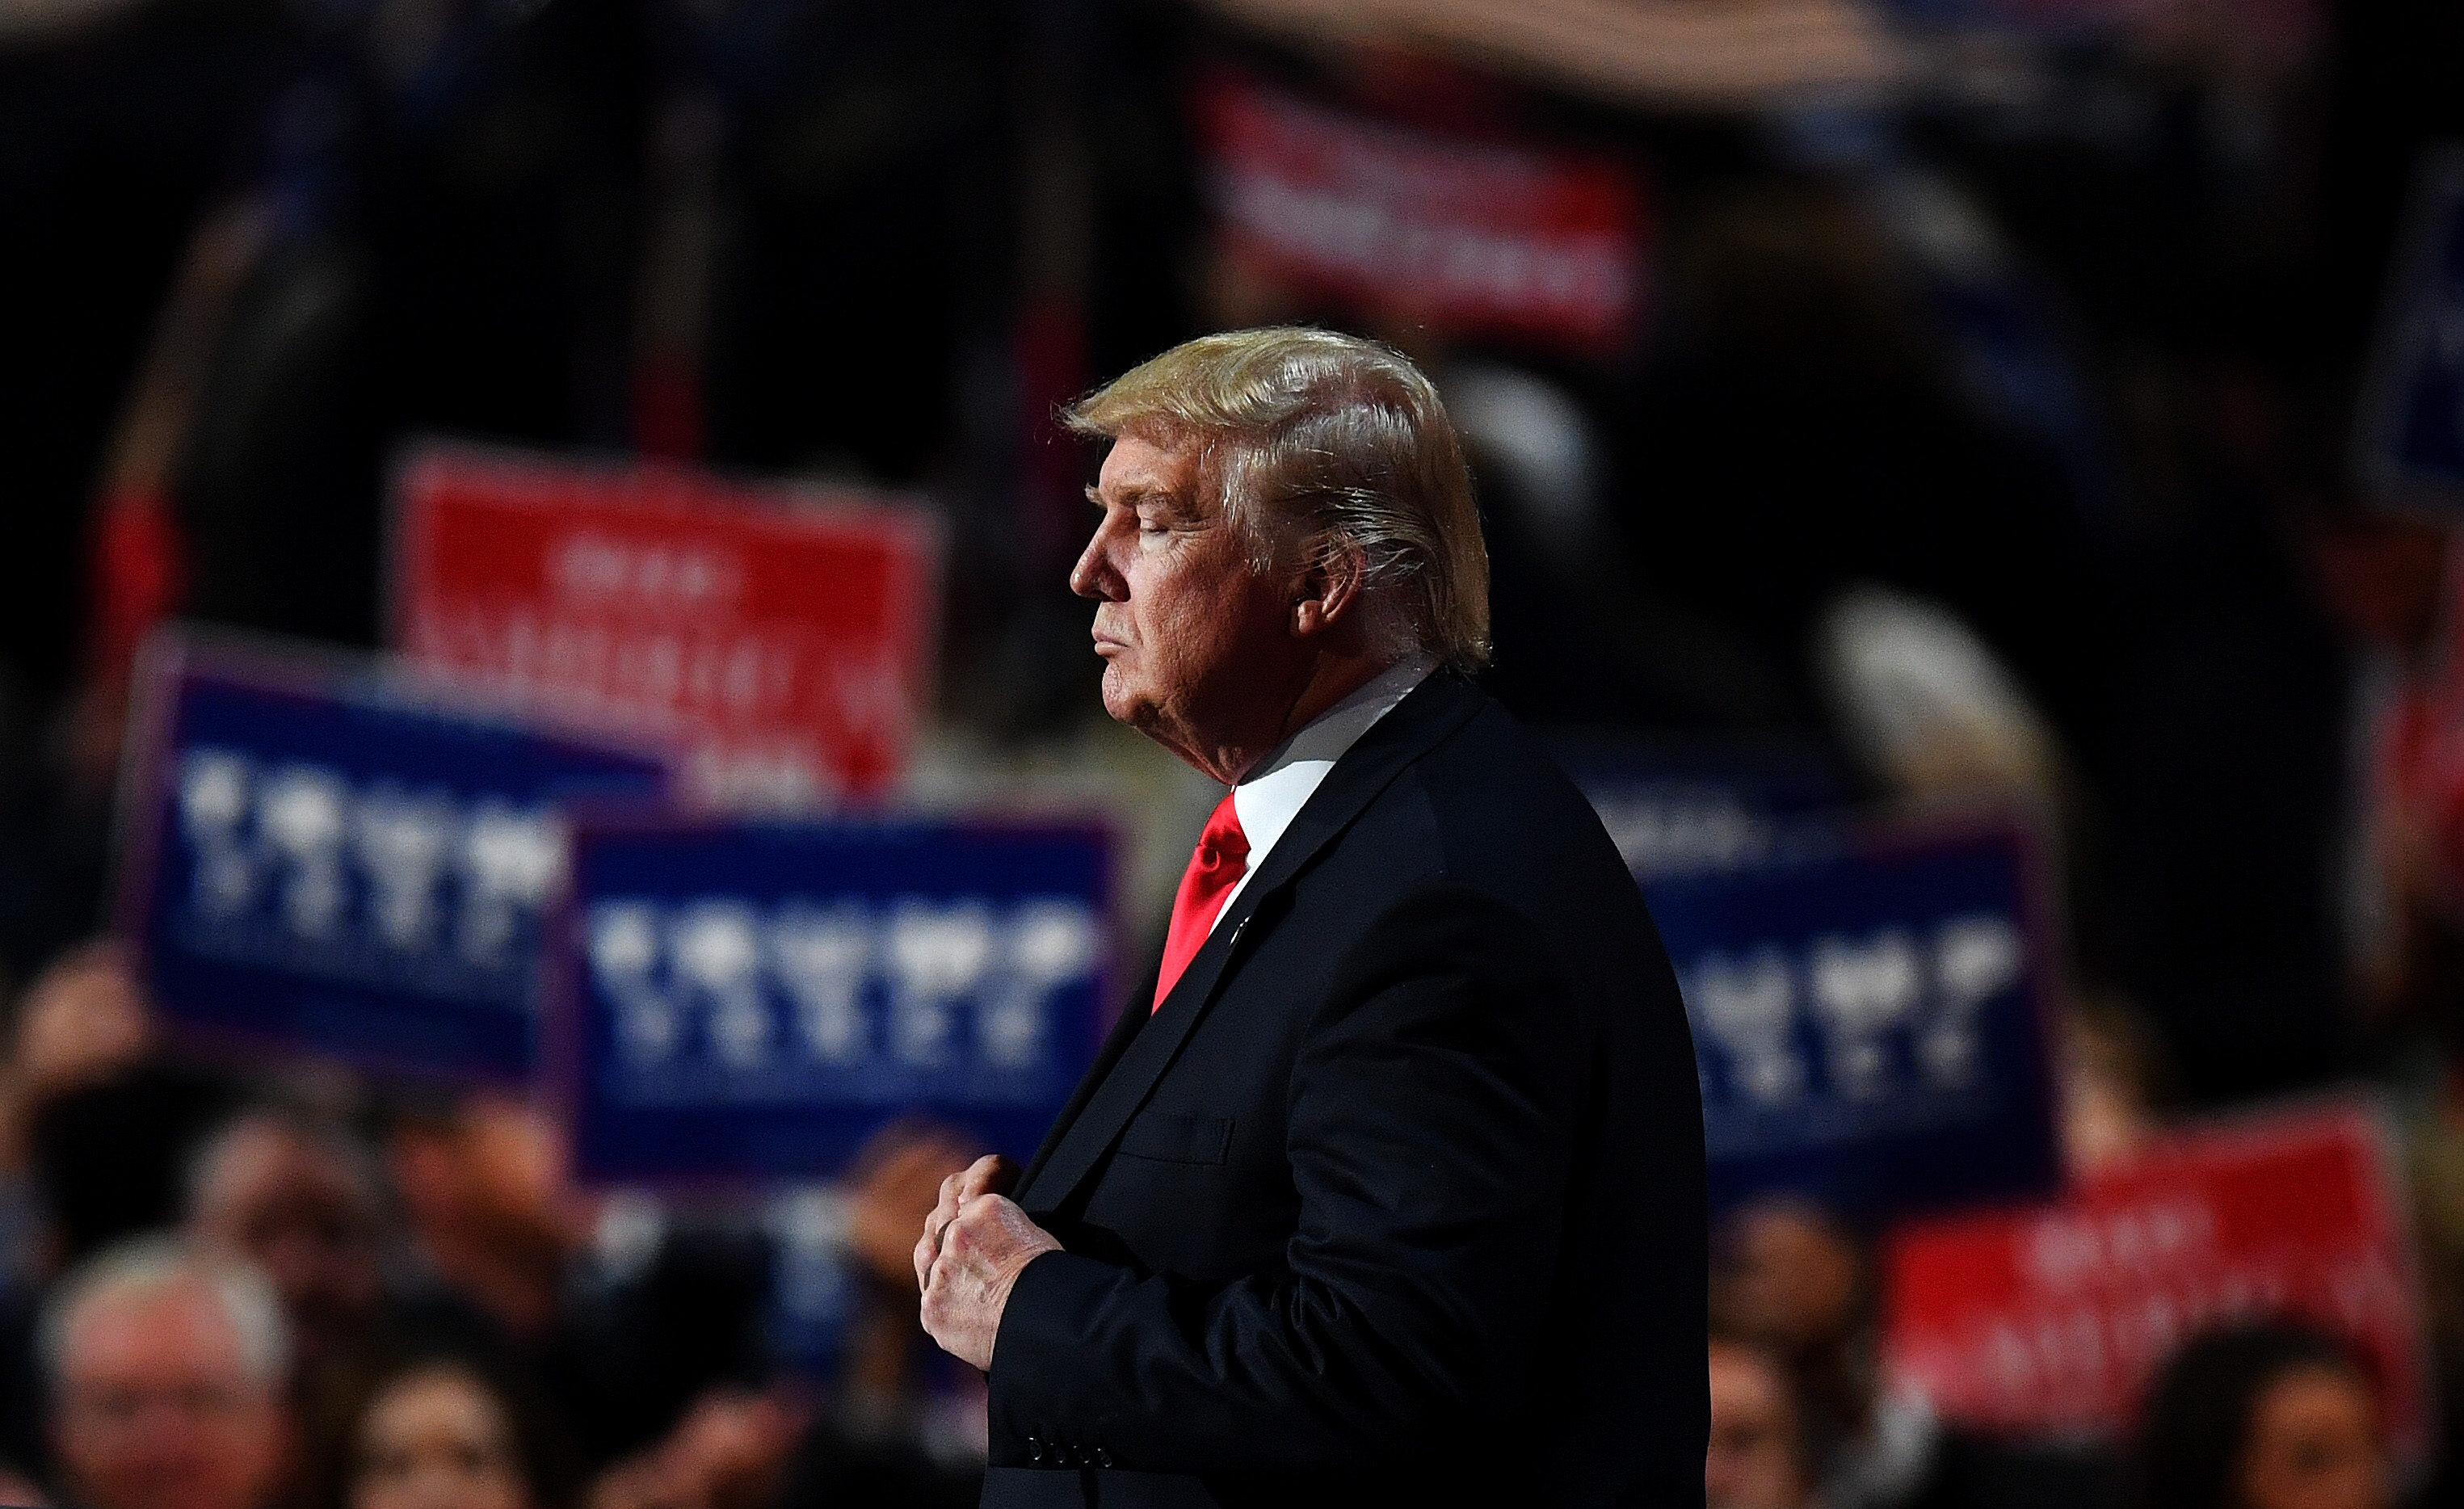 Republican presidential candidate Donald Trump pauses during his speech at the Republican National Convention on July 21, 2016. (Jeff J Mitchell&mdash;Getty Images)